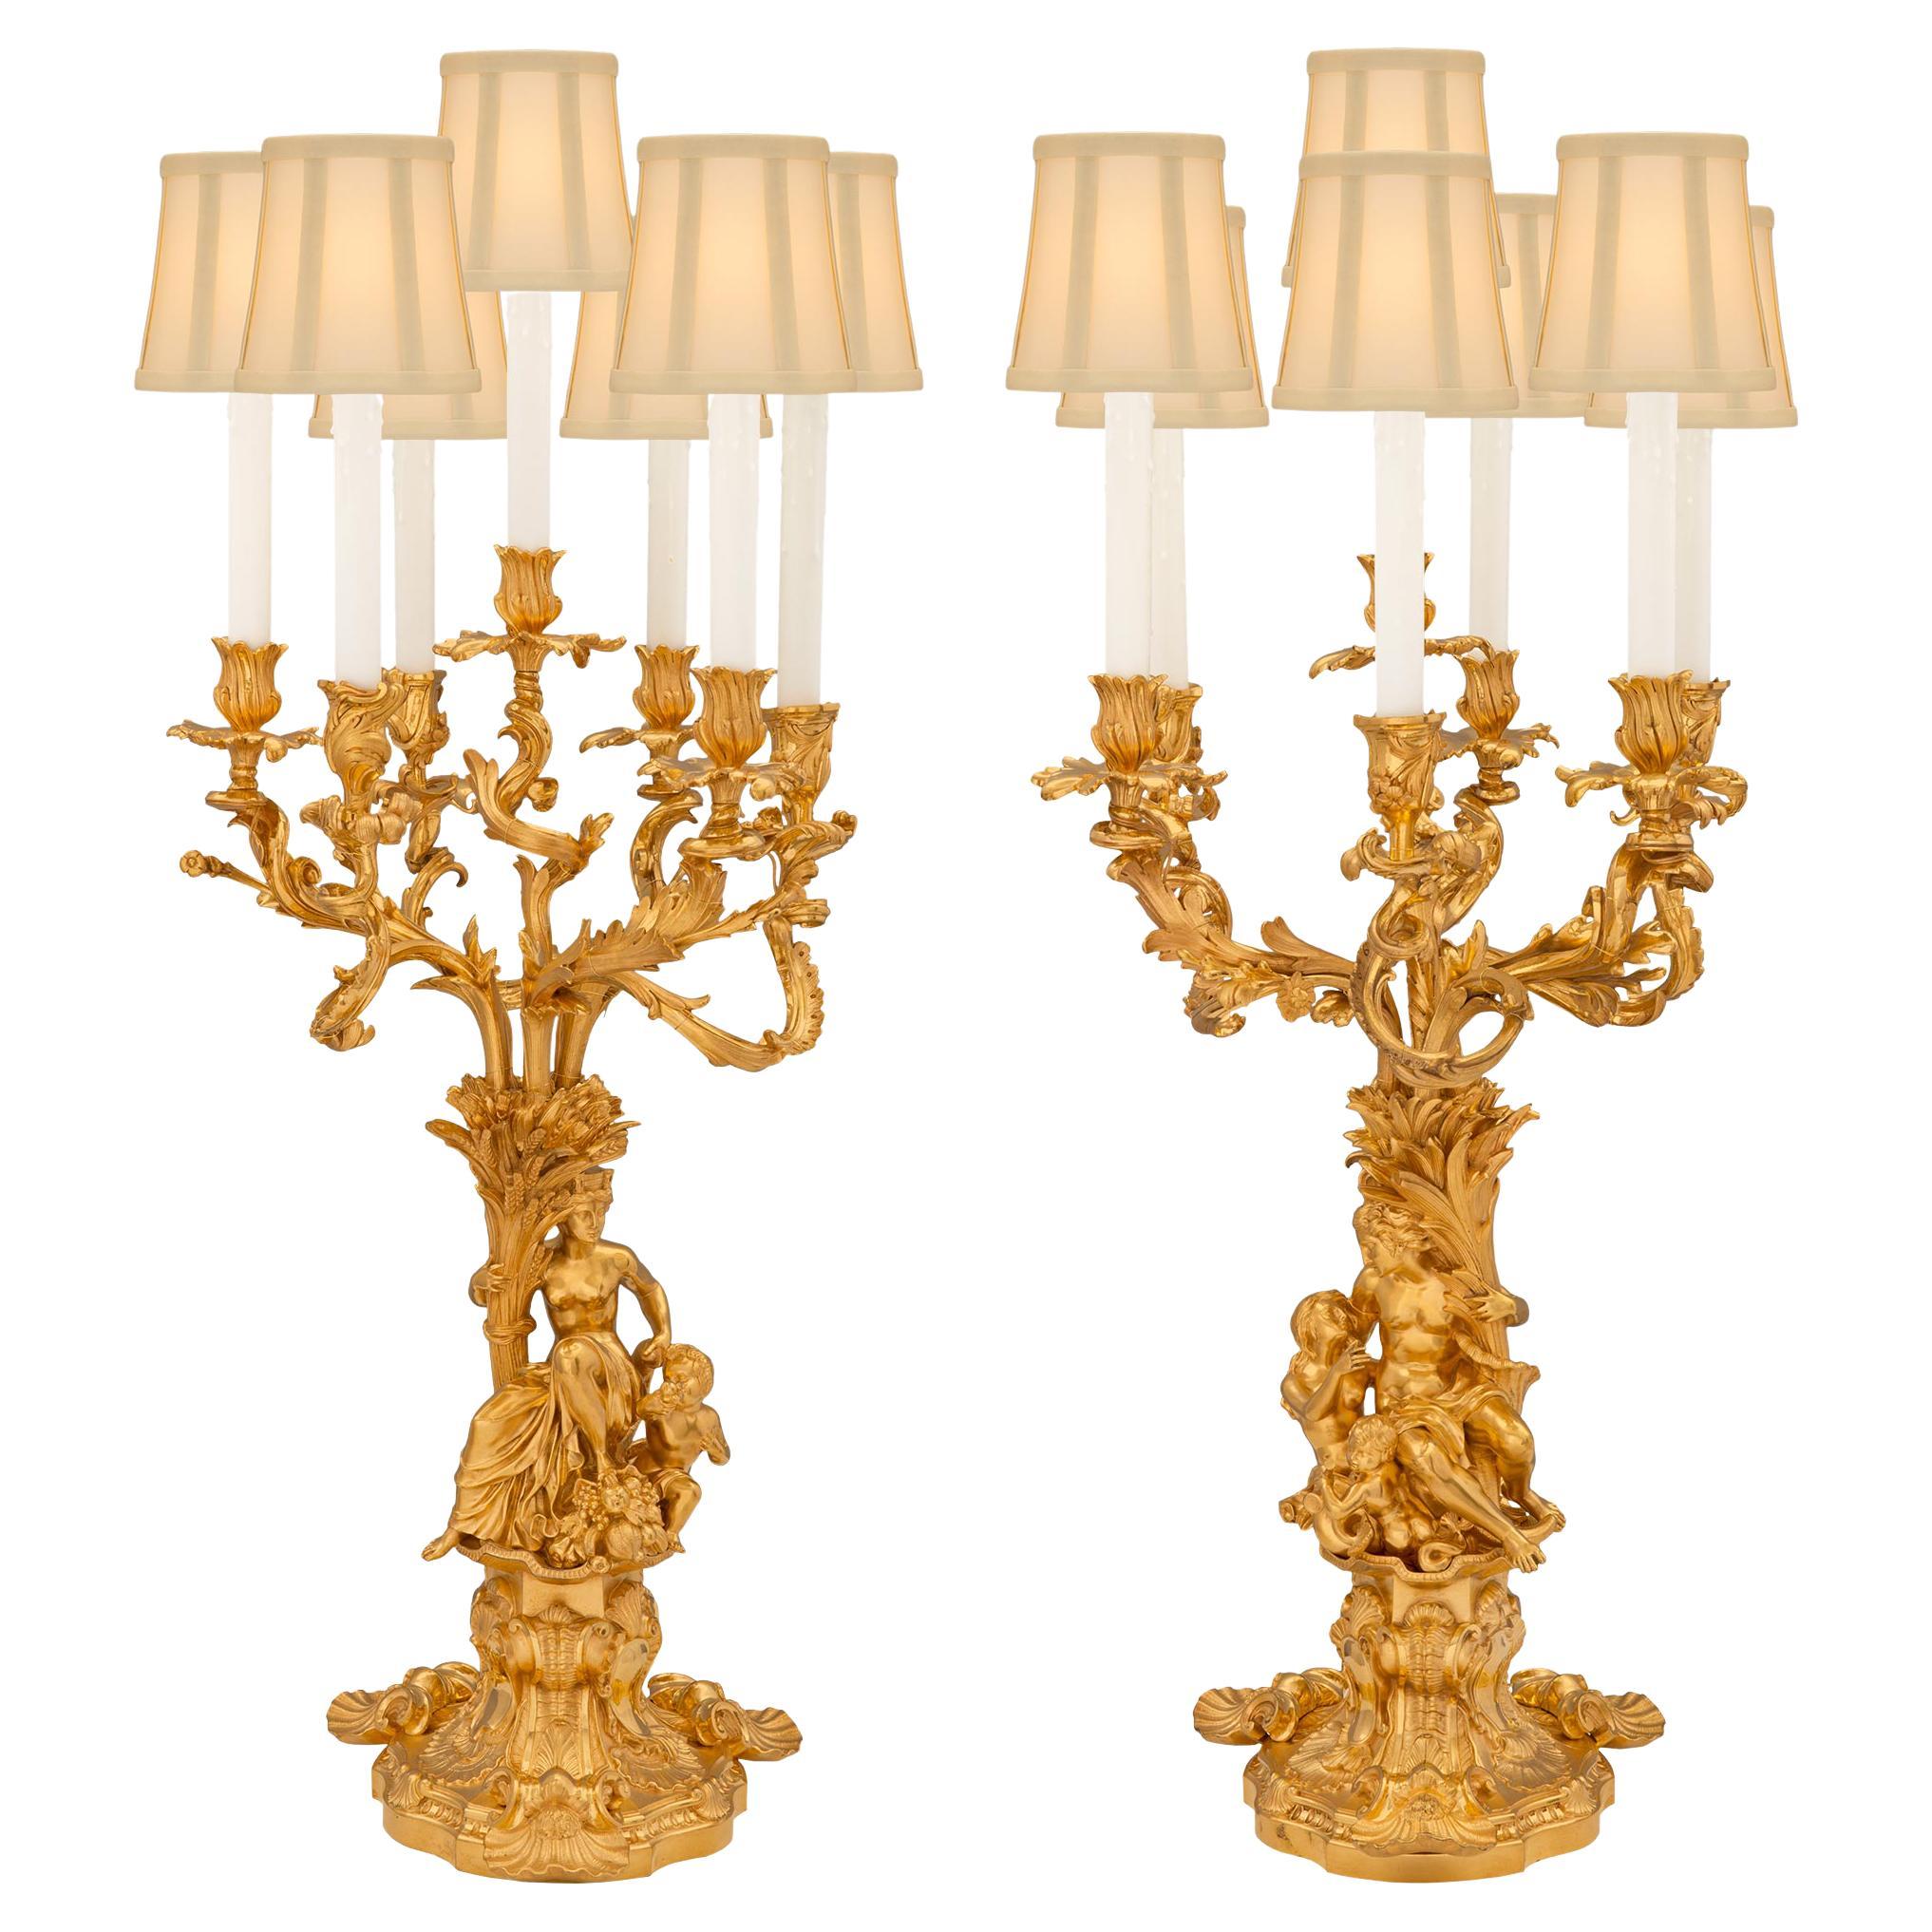 Pair of Large Scale French 19th Century Louis XV St. Ormolu Candelabra Lamps